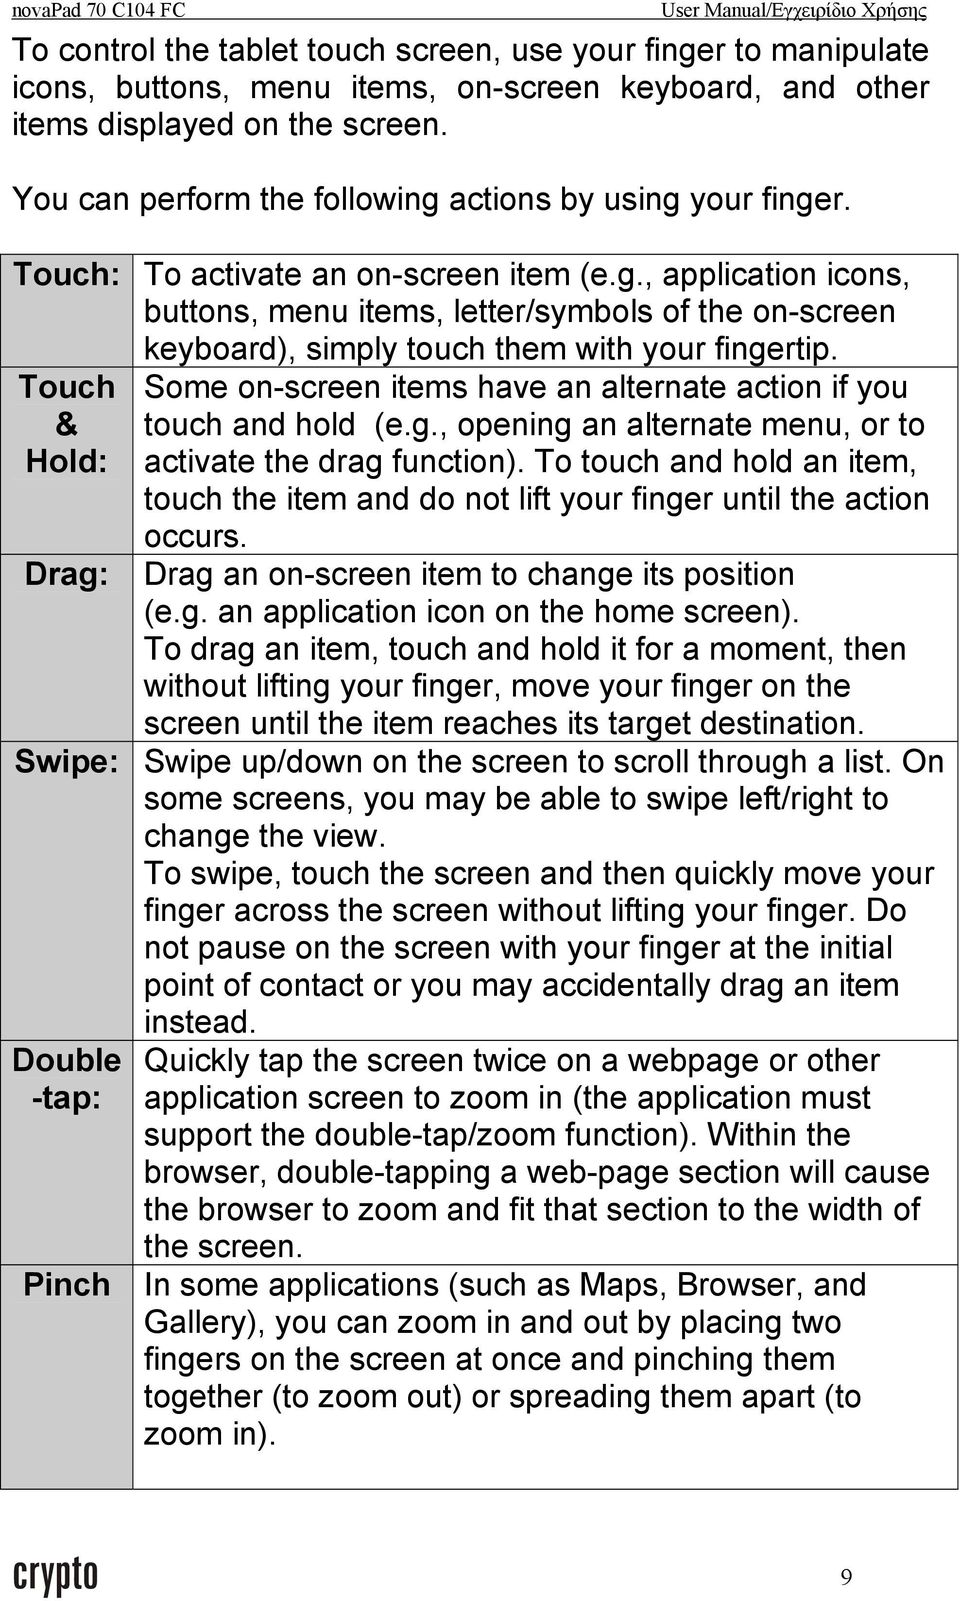 Touch & Hold: Drag: Some on-screen items have an alternate action if you touch and hold (e.g., opening an alternate menu, or to activate the drag function).